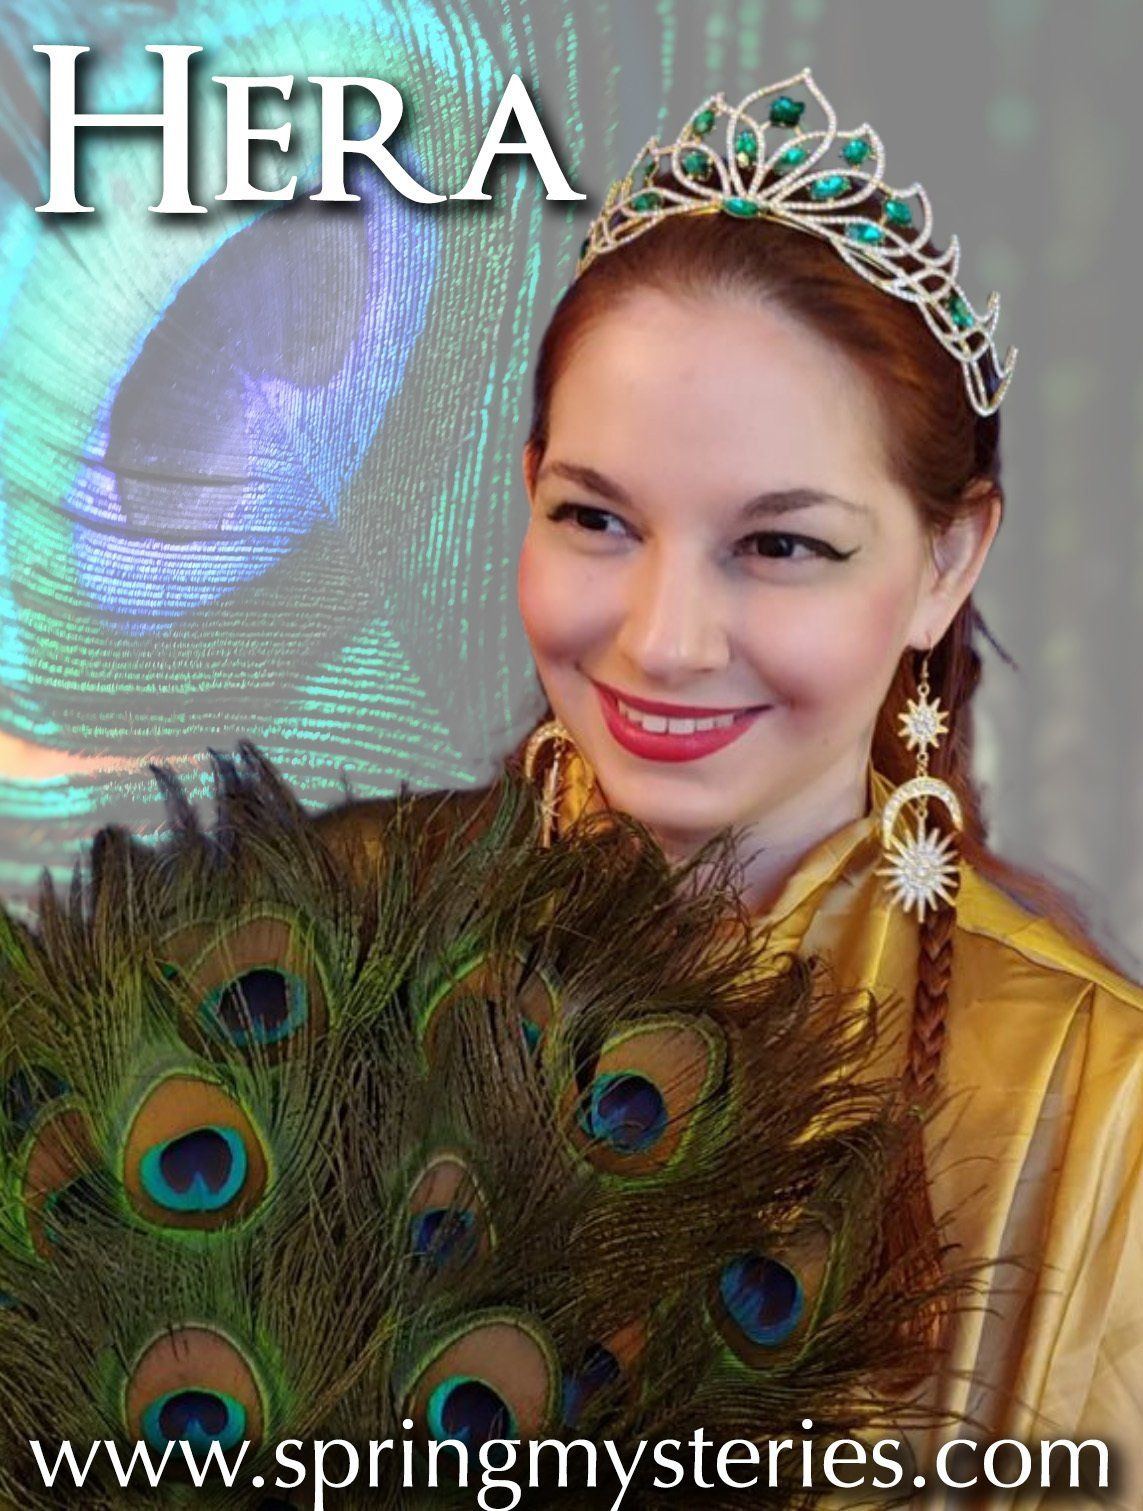 A woman is wearing a peacock feather crown and earrings, representing Hera.